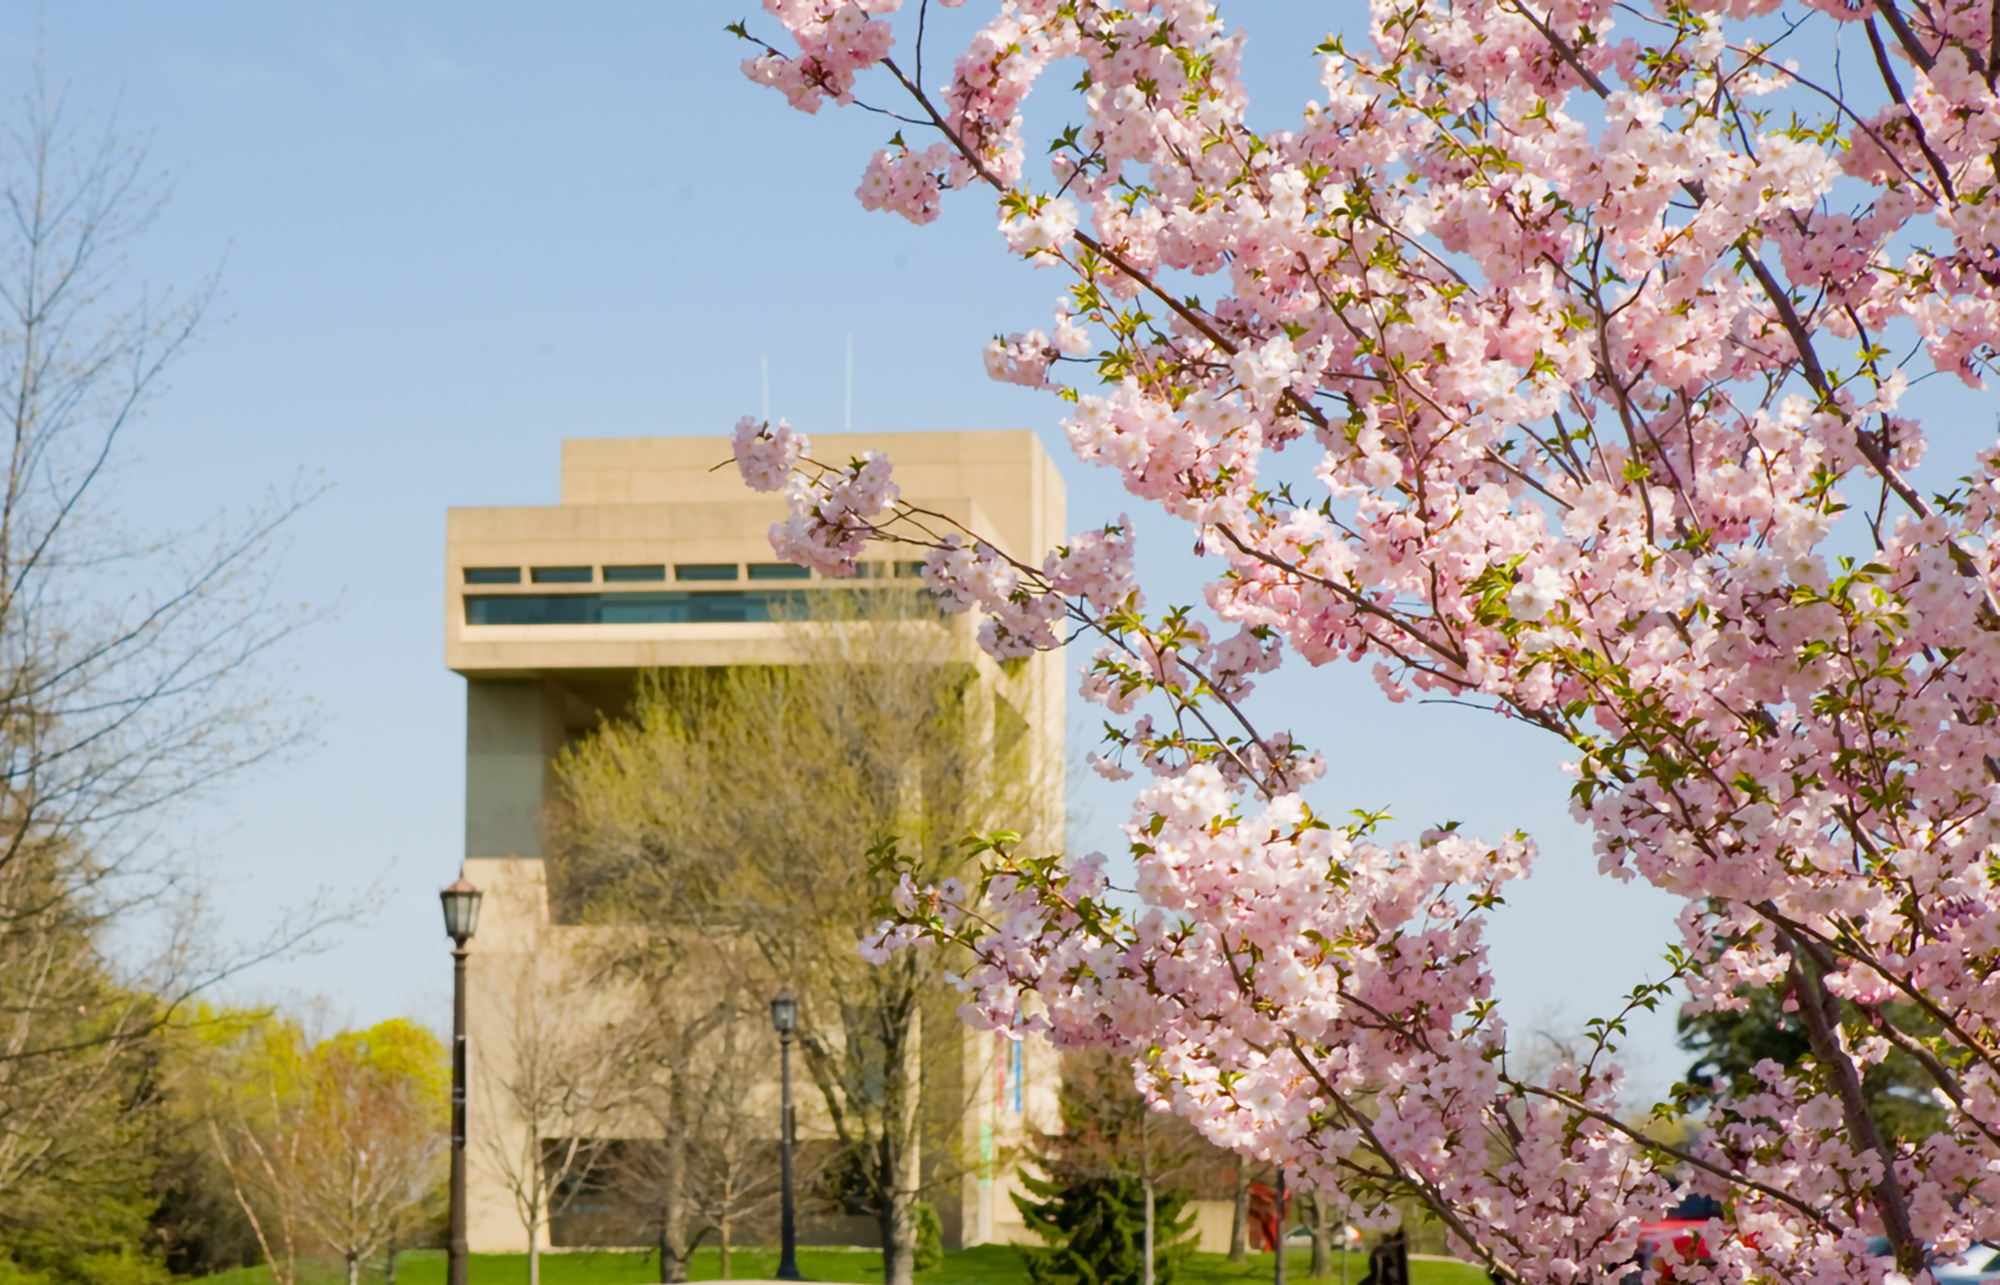 The Johnson Museum of Art in springtime wtih cherry blossoms